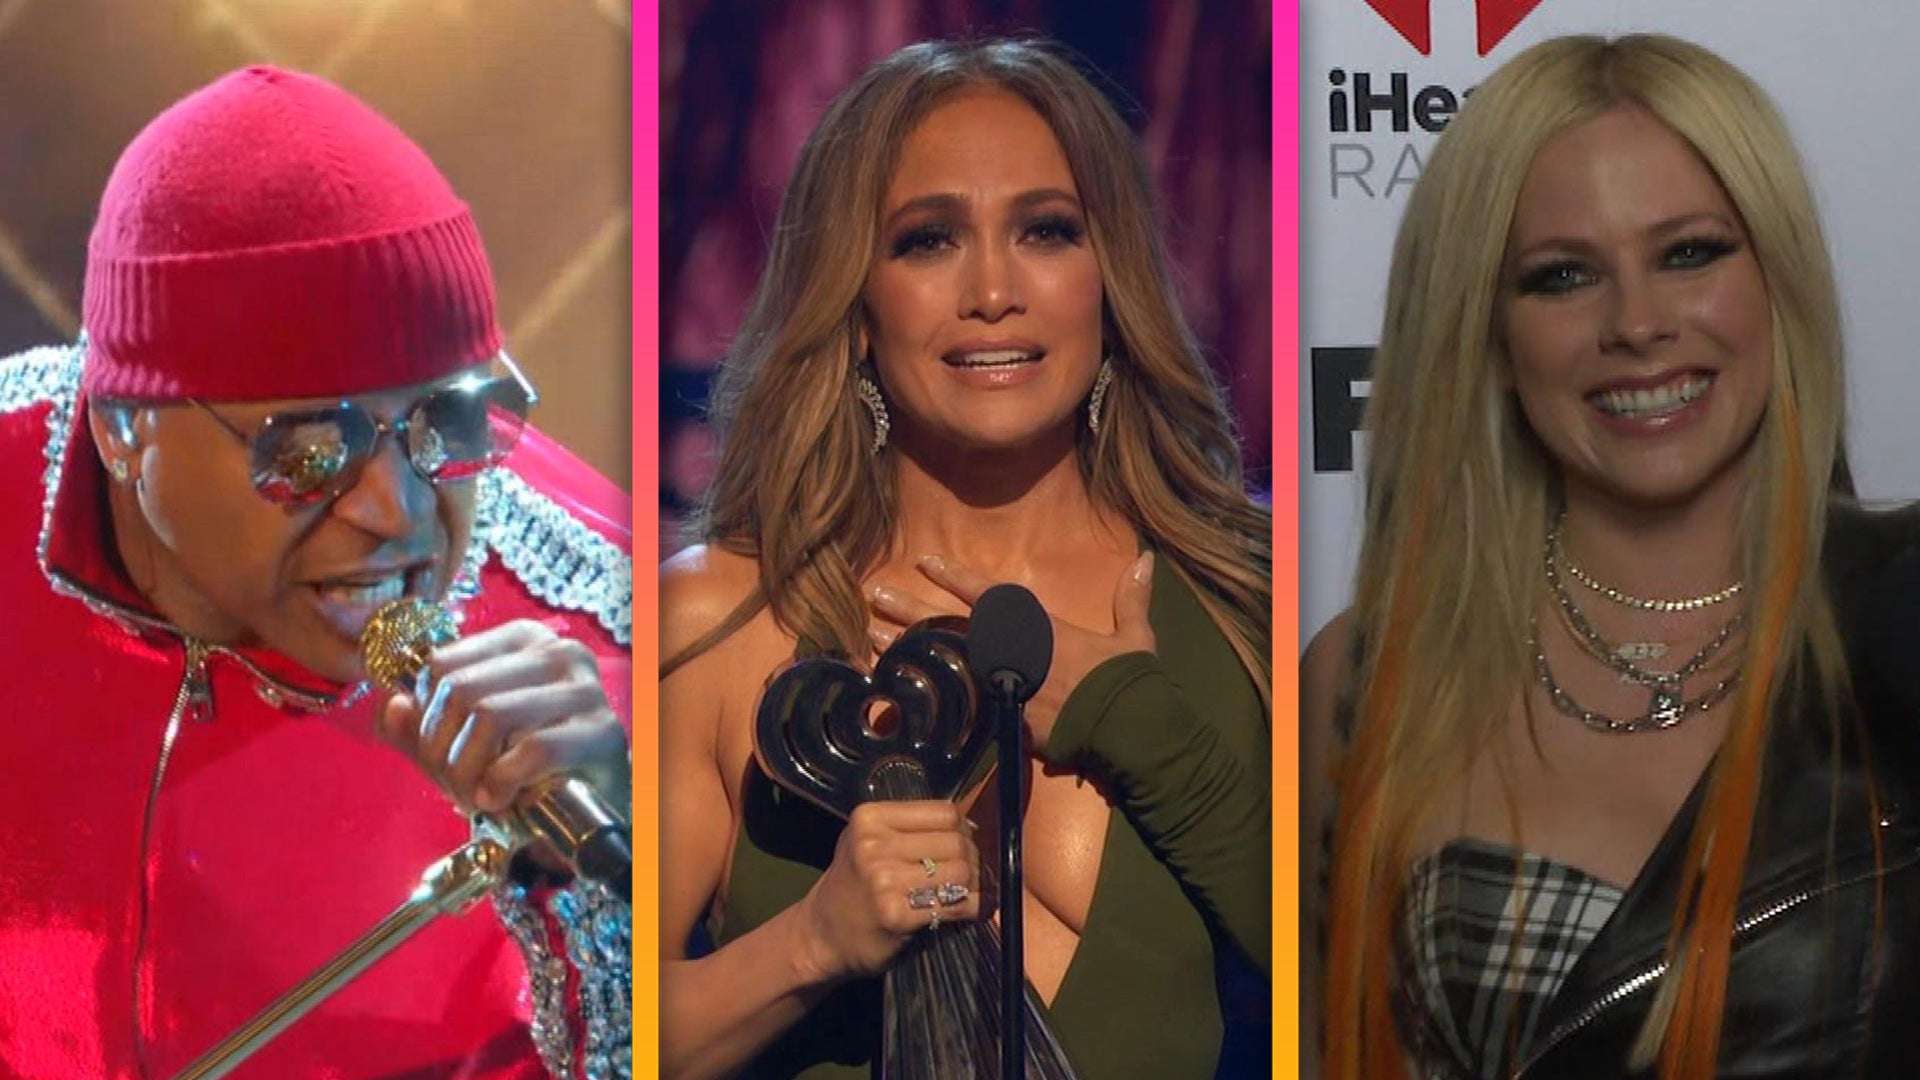 The 2023 iHeartRadio Music Awards Will Feature Performances by P!NK,  Kelly Clarkson, Keith Urban, Pat Benatar & Neil Giraldo, Muni Long, Cody  Johnson and More Monday, March 27, Live on FOX